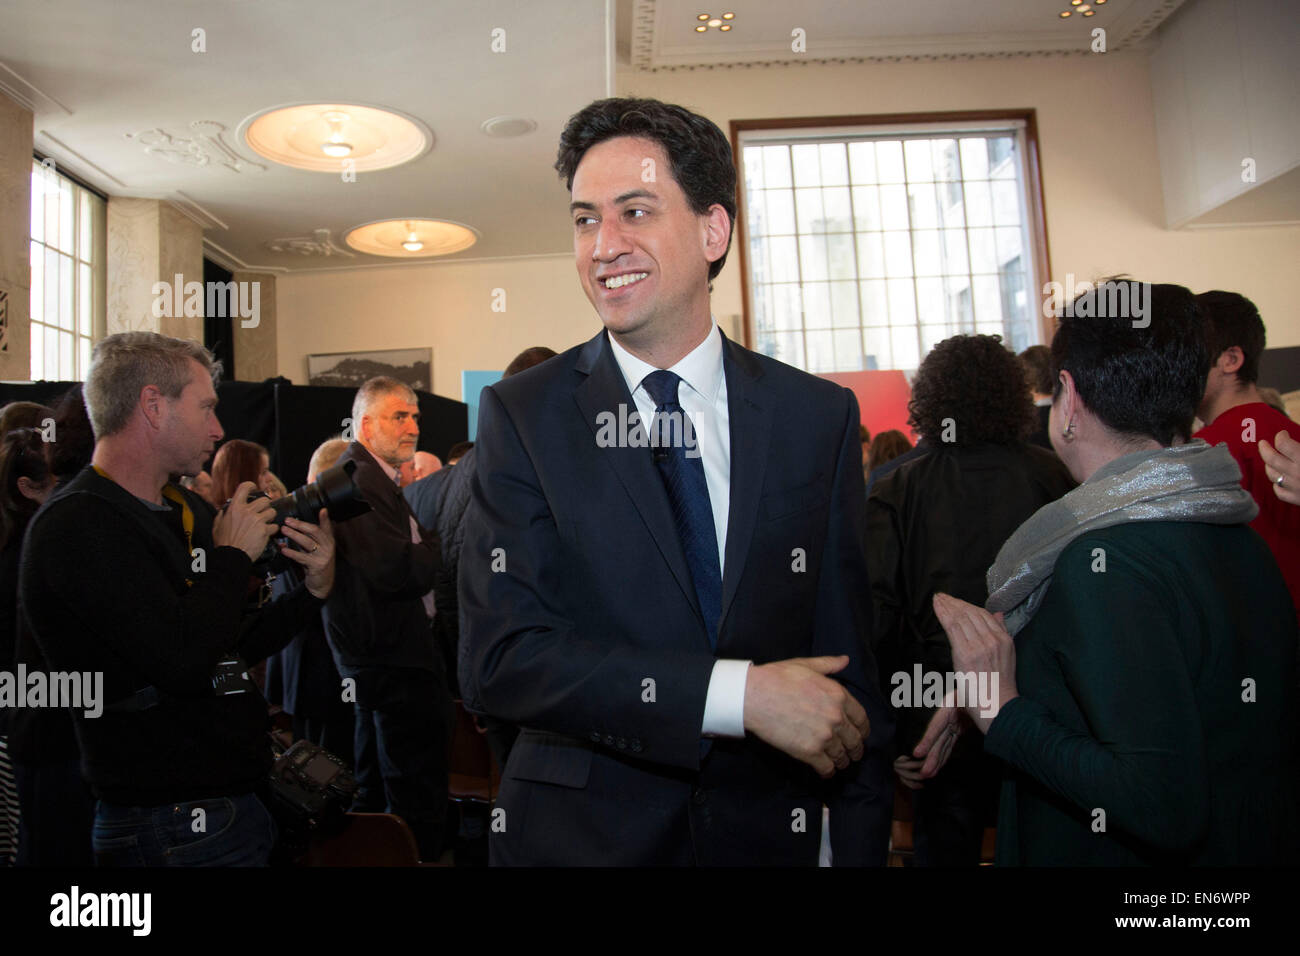 London, UK. Wednesday 29th April 2015. Labour Party Leader Ed Miliband leaving a General Election 2015 campaign event on the Tory threat to family finances, entitled: The Tories’ Secret Plan. Held at the Royal Institute of British Architects. Credit:  Michael Kemp/Alamy Live News Stock Photo